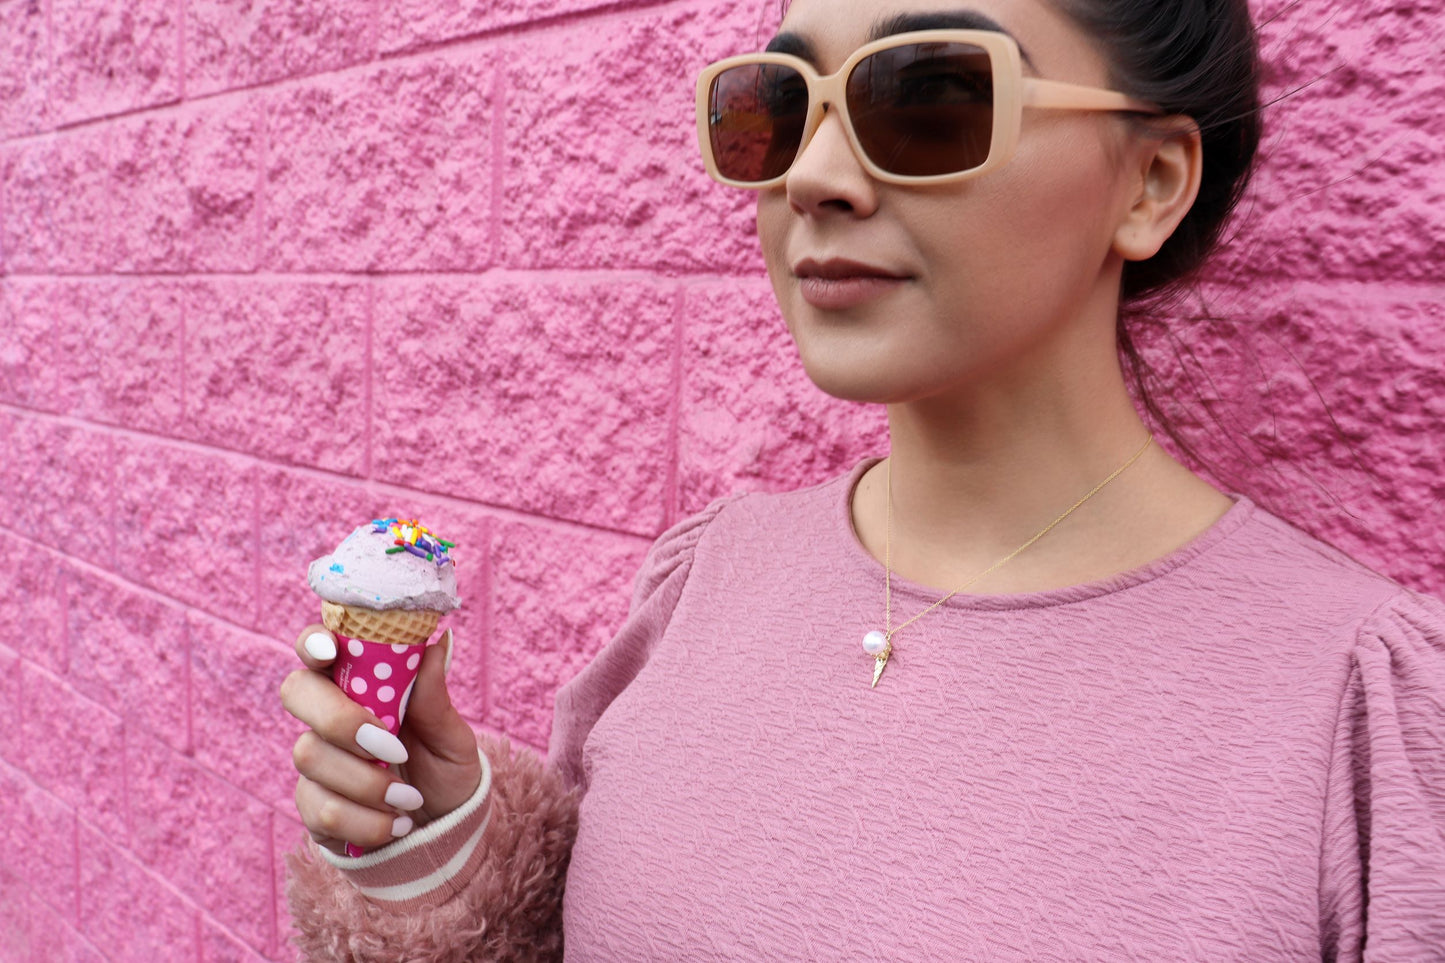 woman standing against a pink wall wearing a pink t-shirt and sunglasses eating ice cream and wearing a pearl ice cream pendant necklace